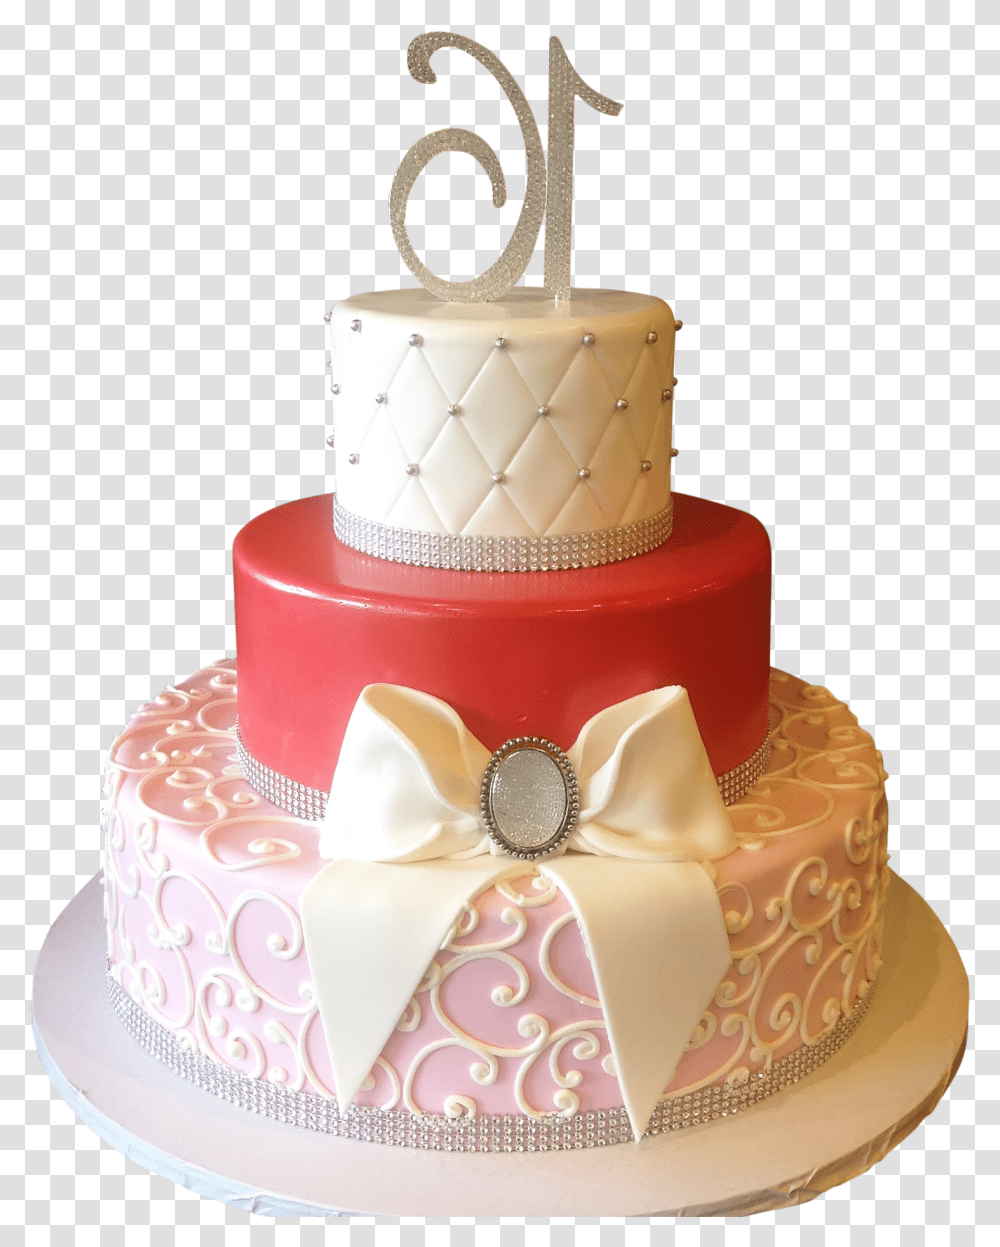 16th Birthday Cakes Images Tldn Elegant Sweet 16 Birthday Birthday Cake, Dessert, Food, Wedding Cake Transparent Png